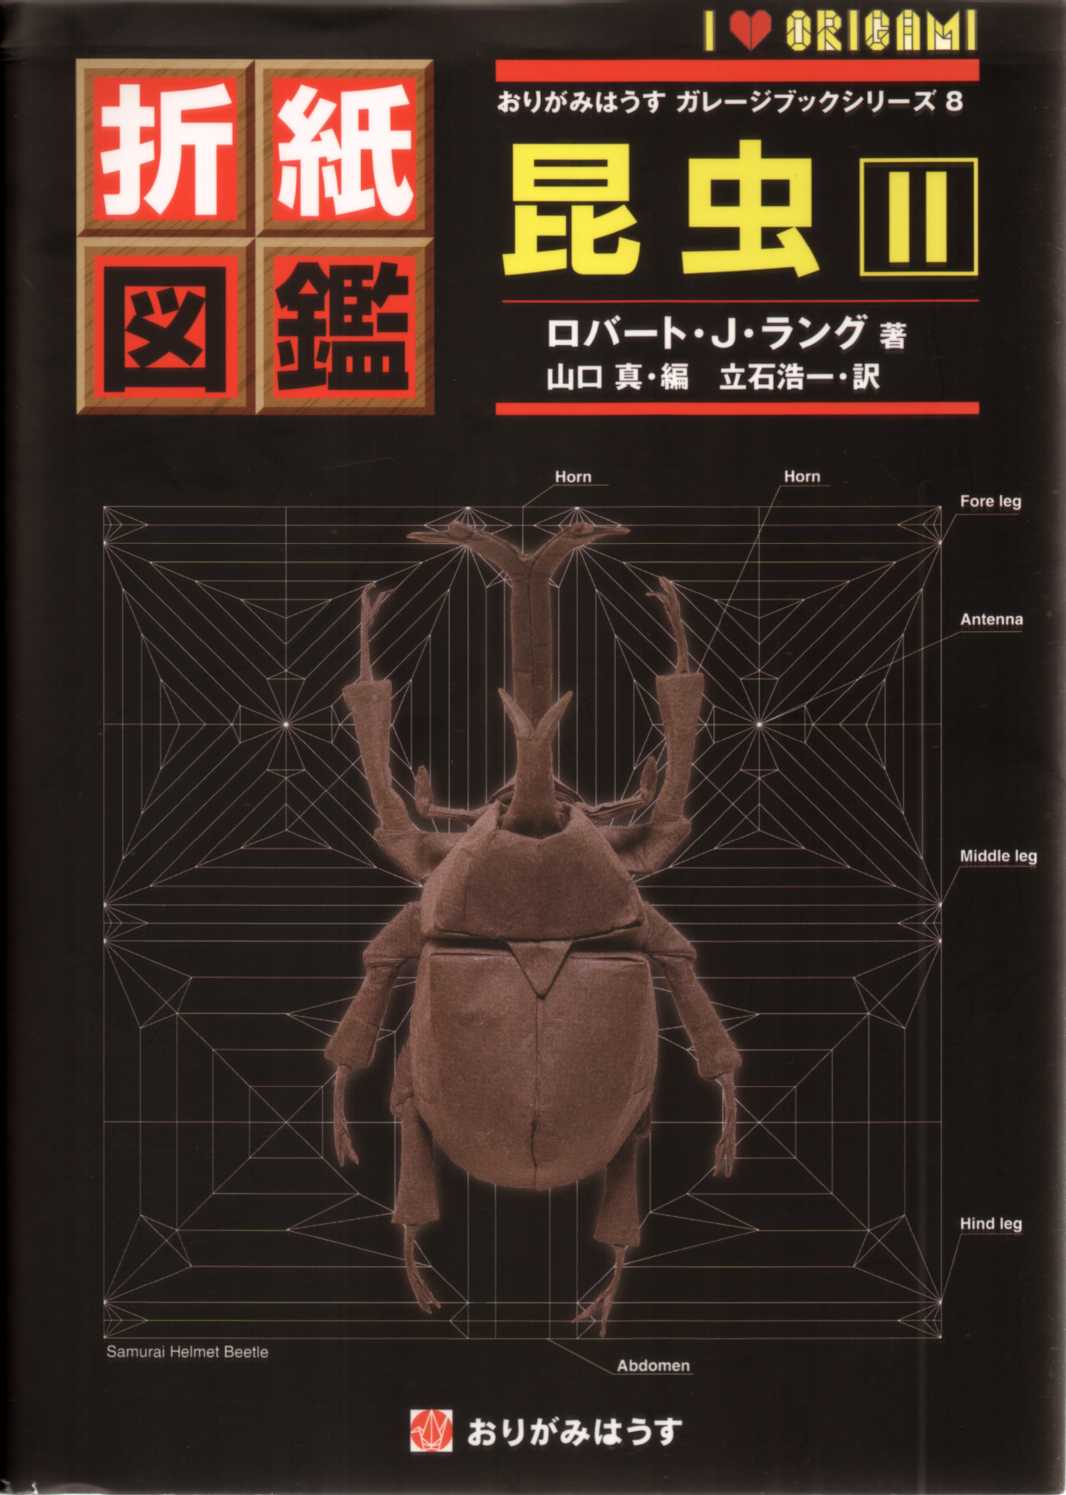 Origami Insects II / 折紙図鑑　昆虫・2 : page 13.